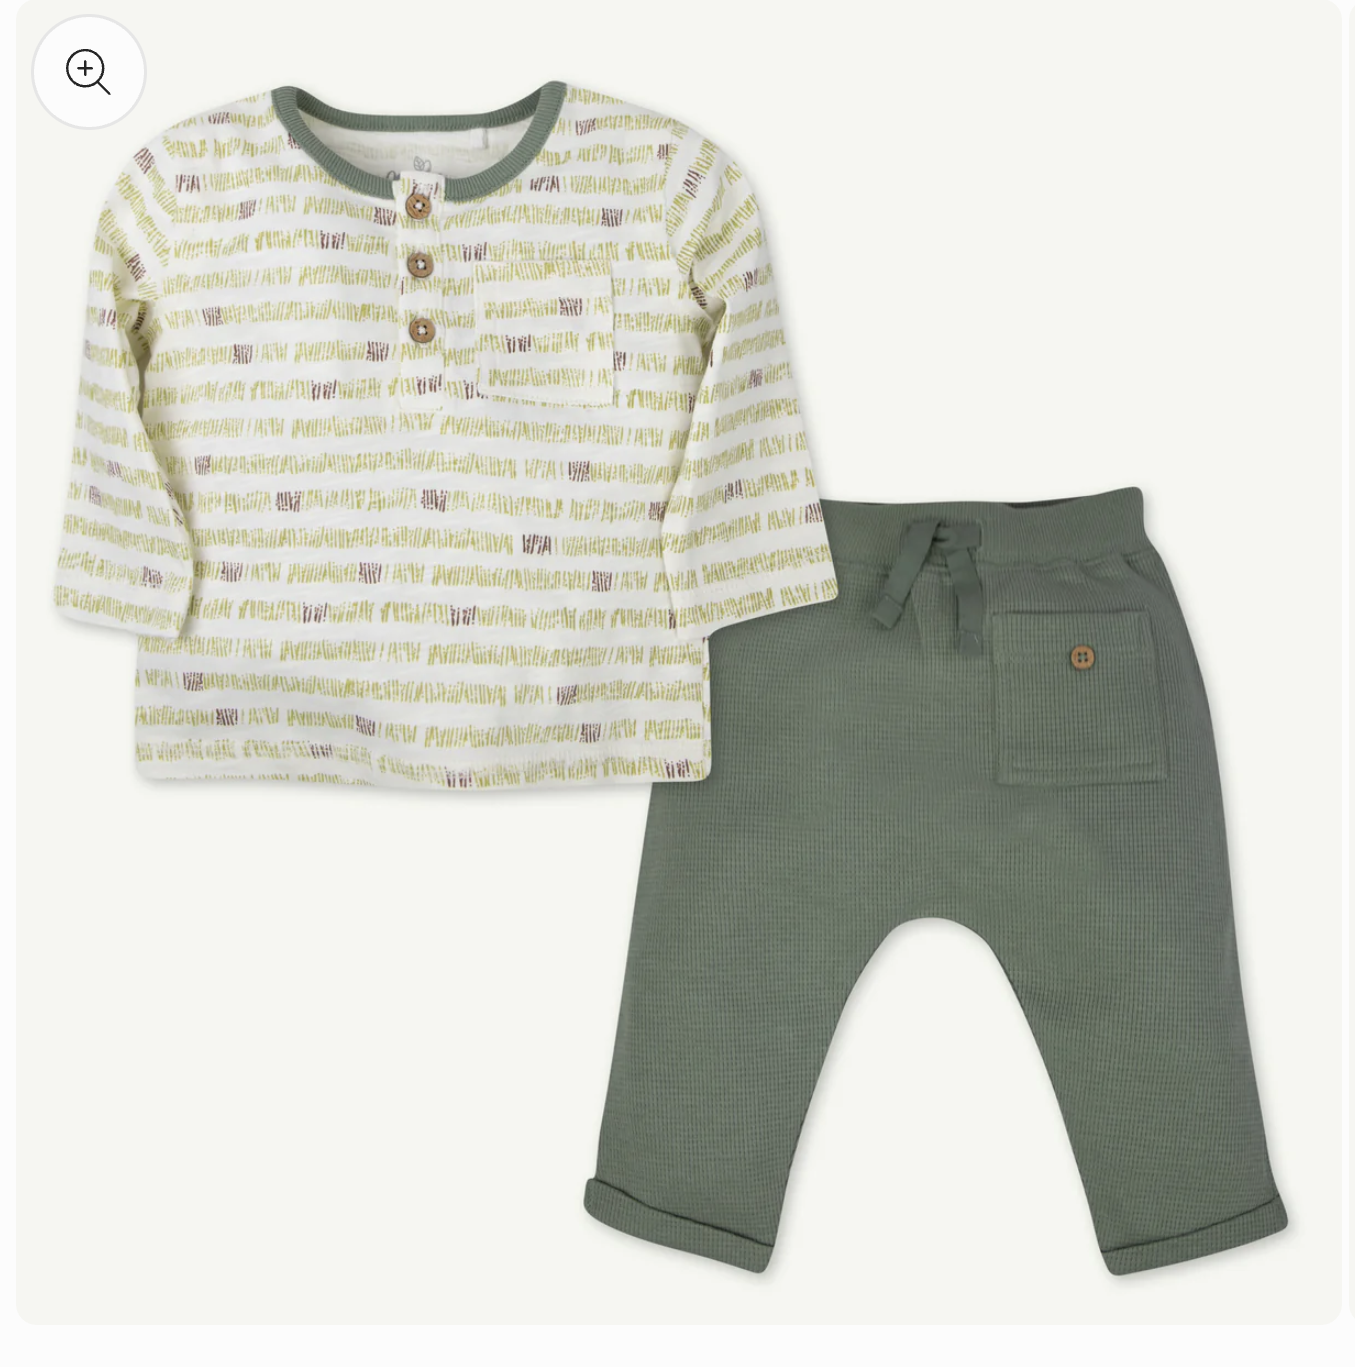 Oliver & Rain Baby & Toddler Geo 2 pc Outfit